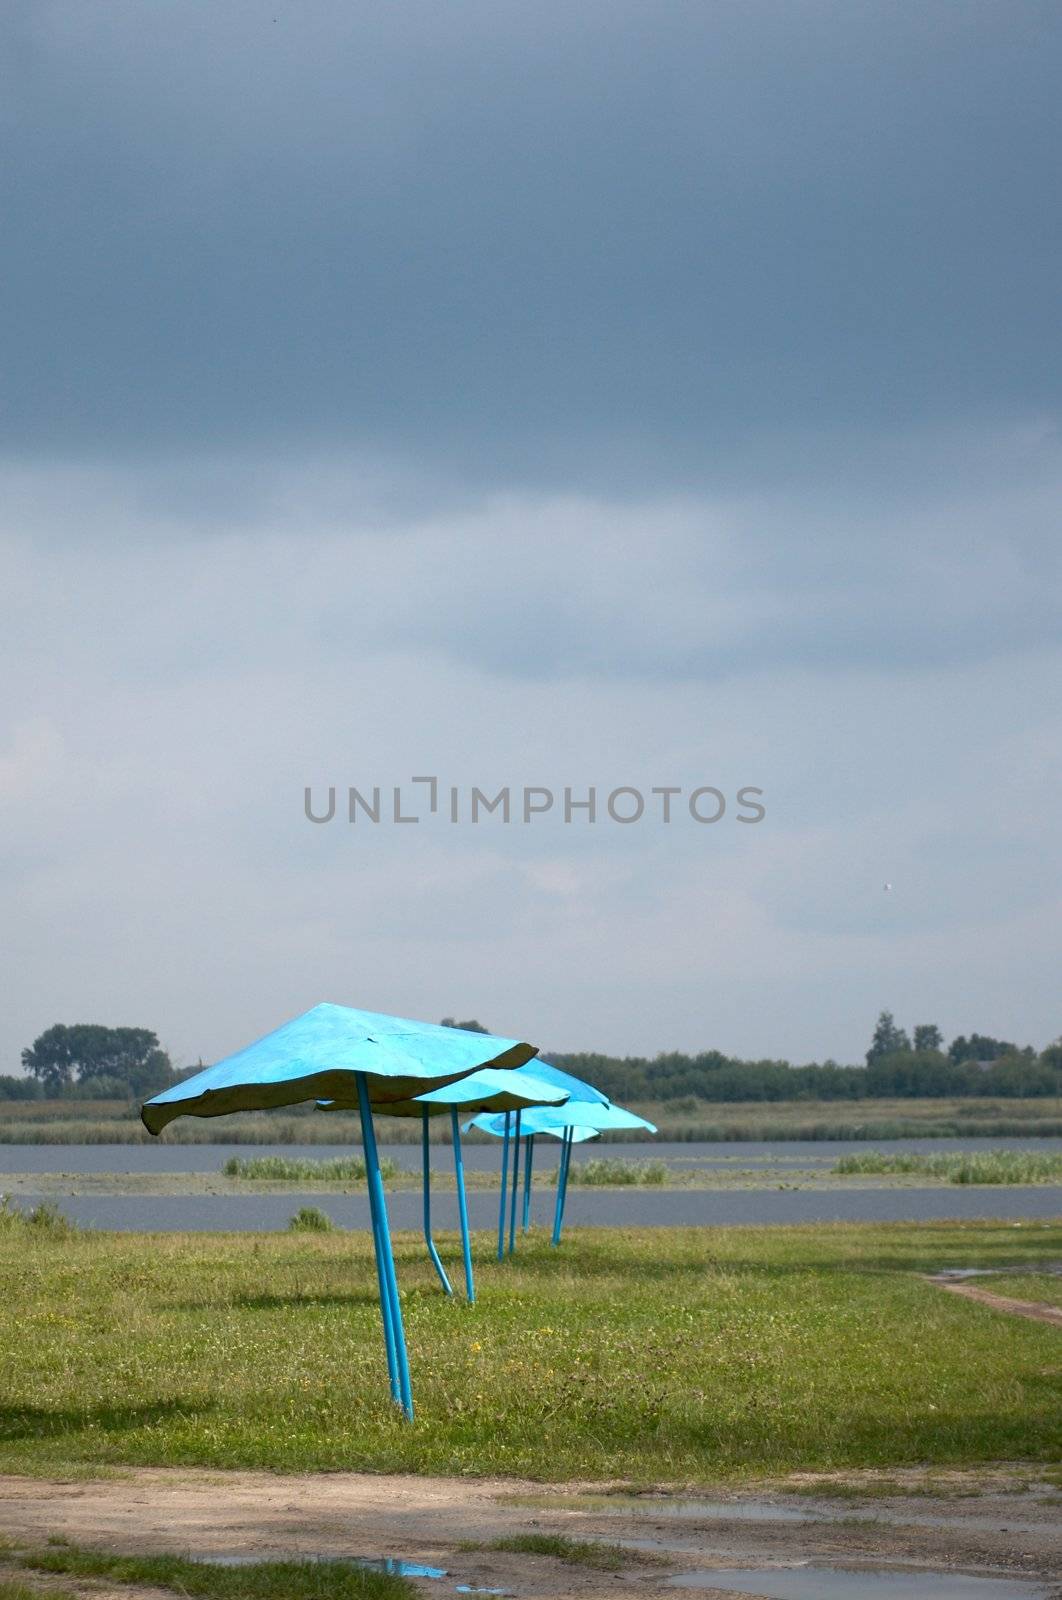 An image of umbrellas on the beath